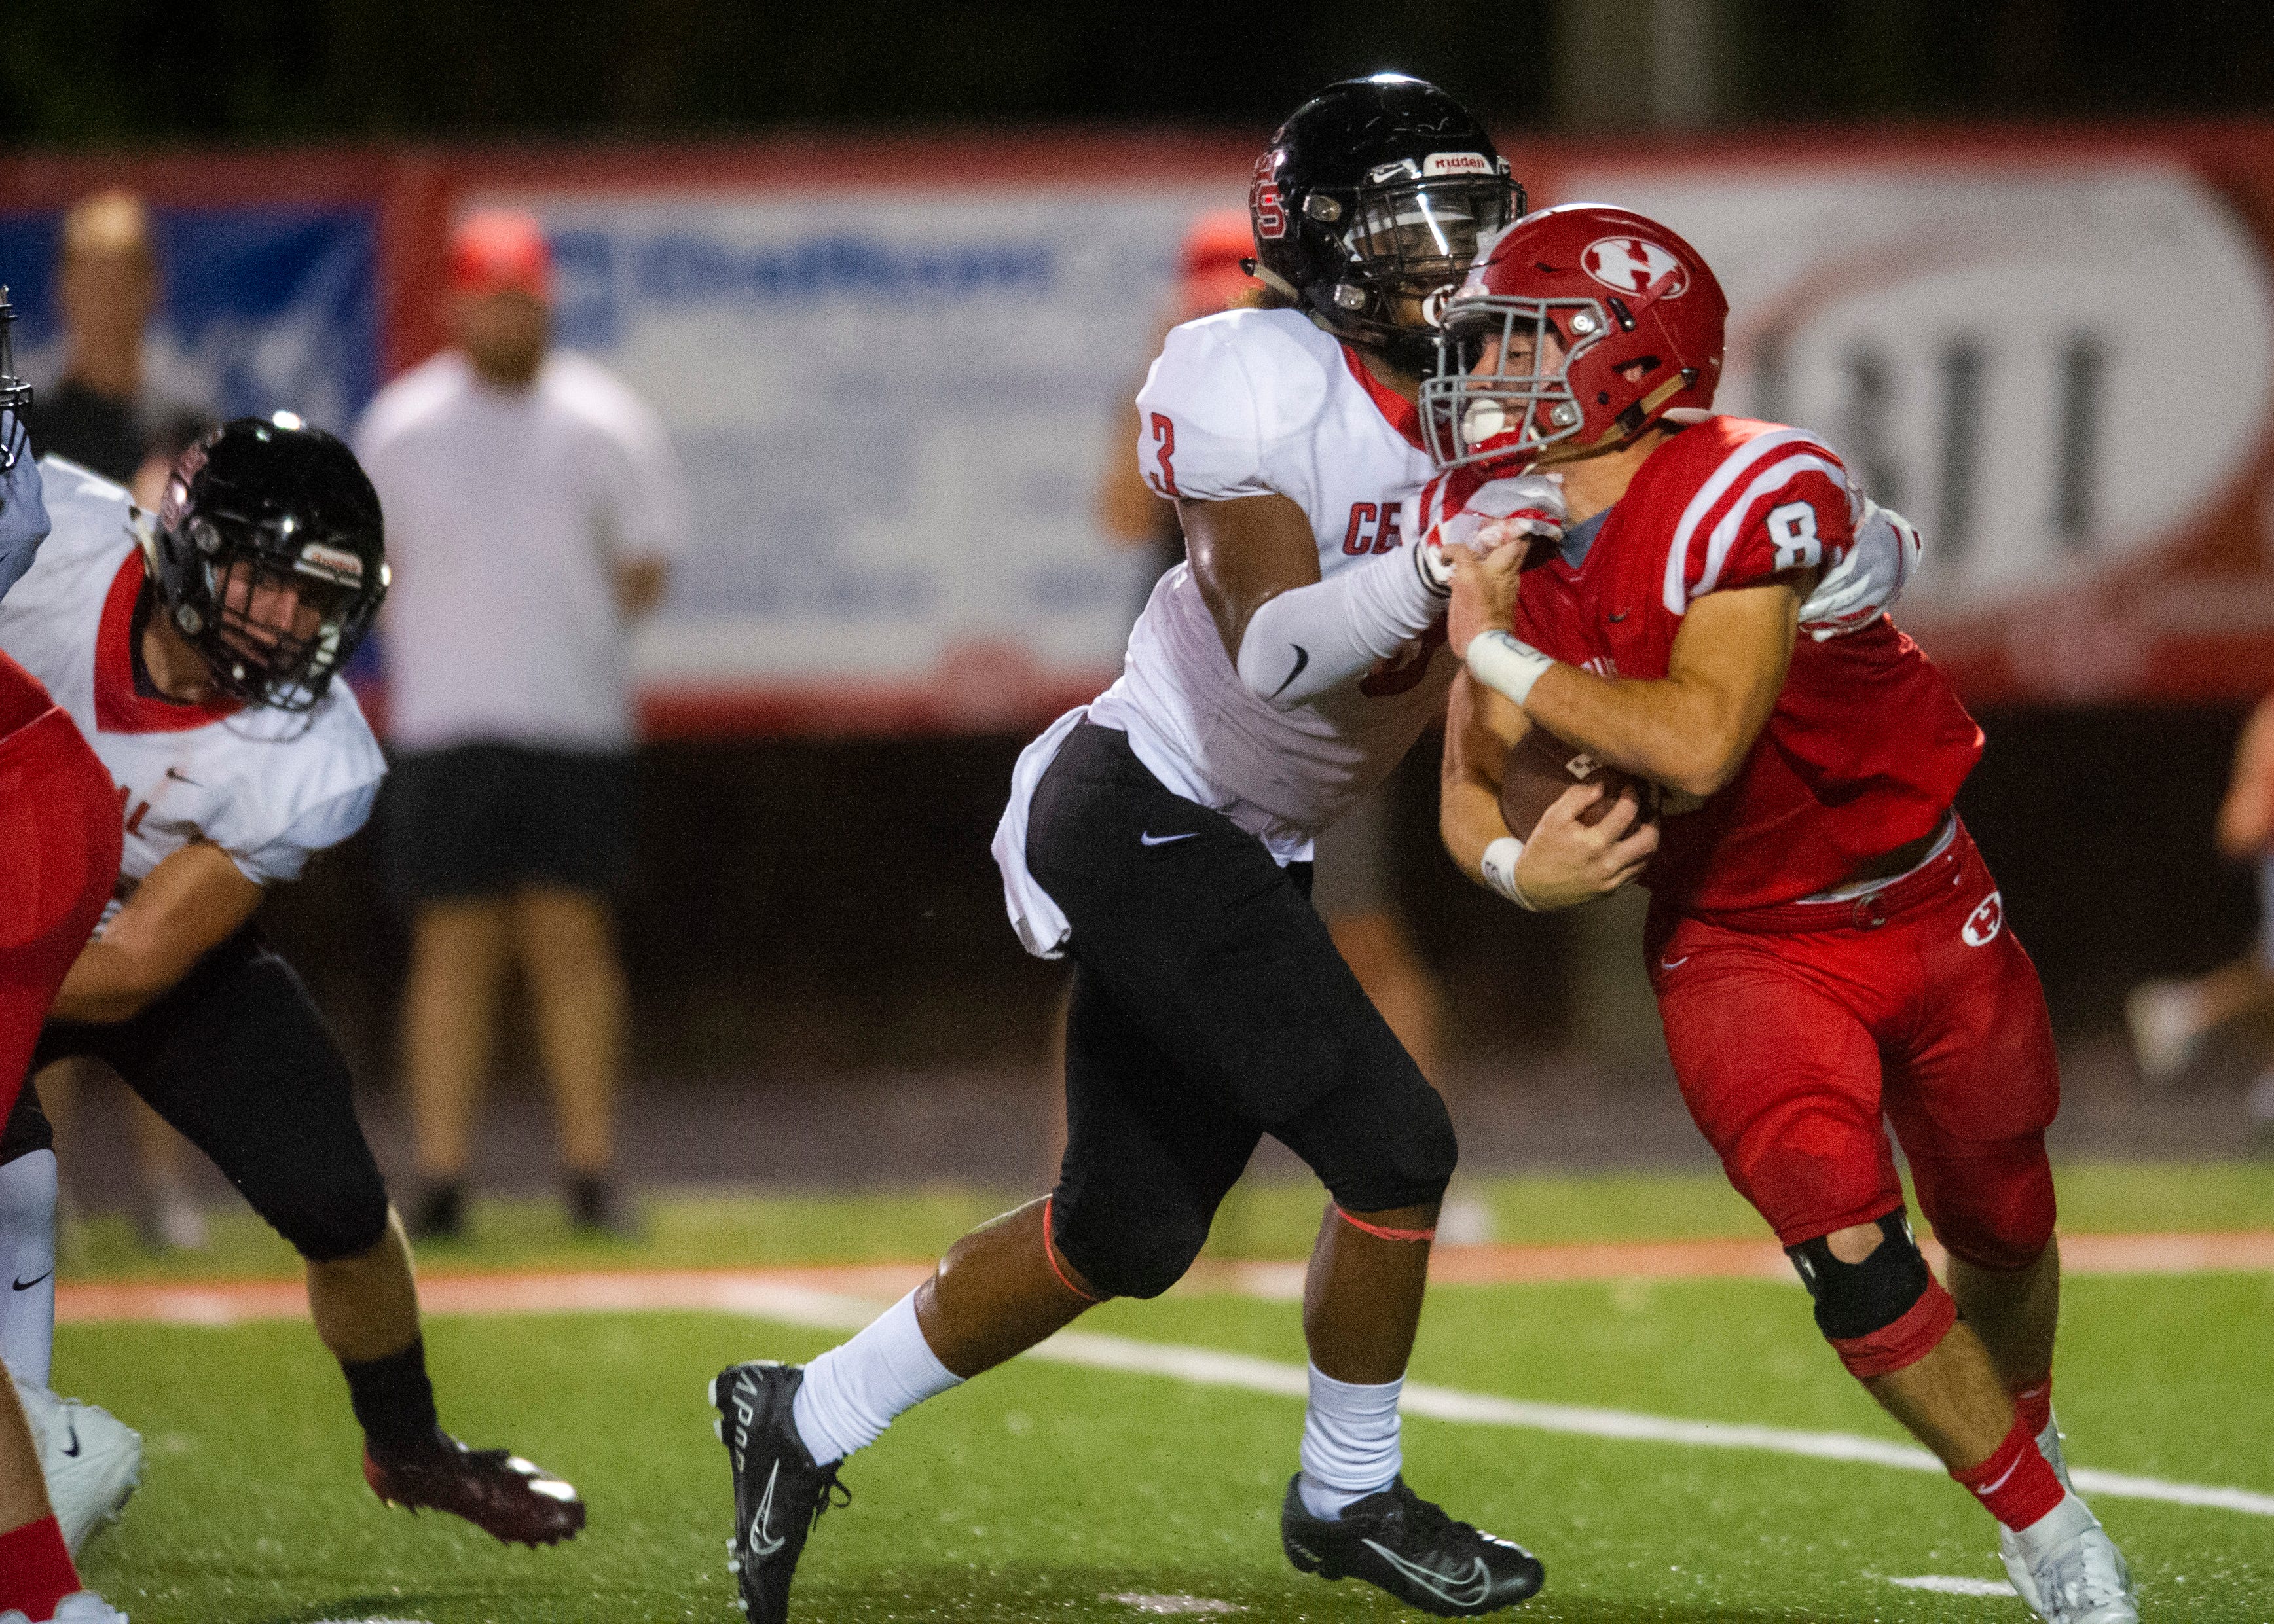 Halls' Jake Parris (8) attempts to escape Central's Eunique Valentine (3) grasp during the Halls and Central high school football game on Friday, October 4, 2019 at Halls High School.